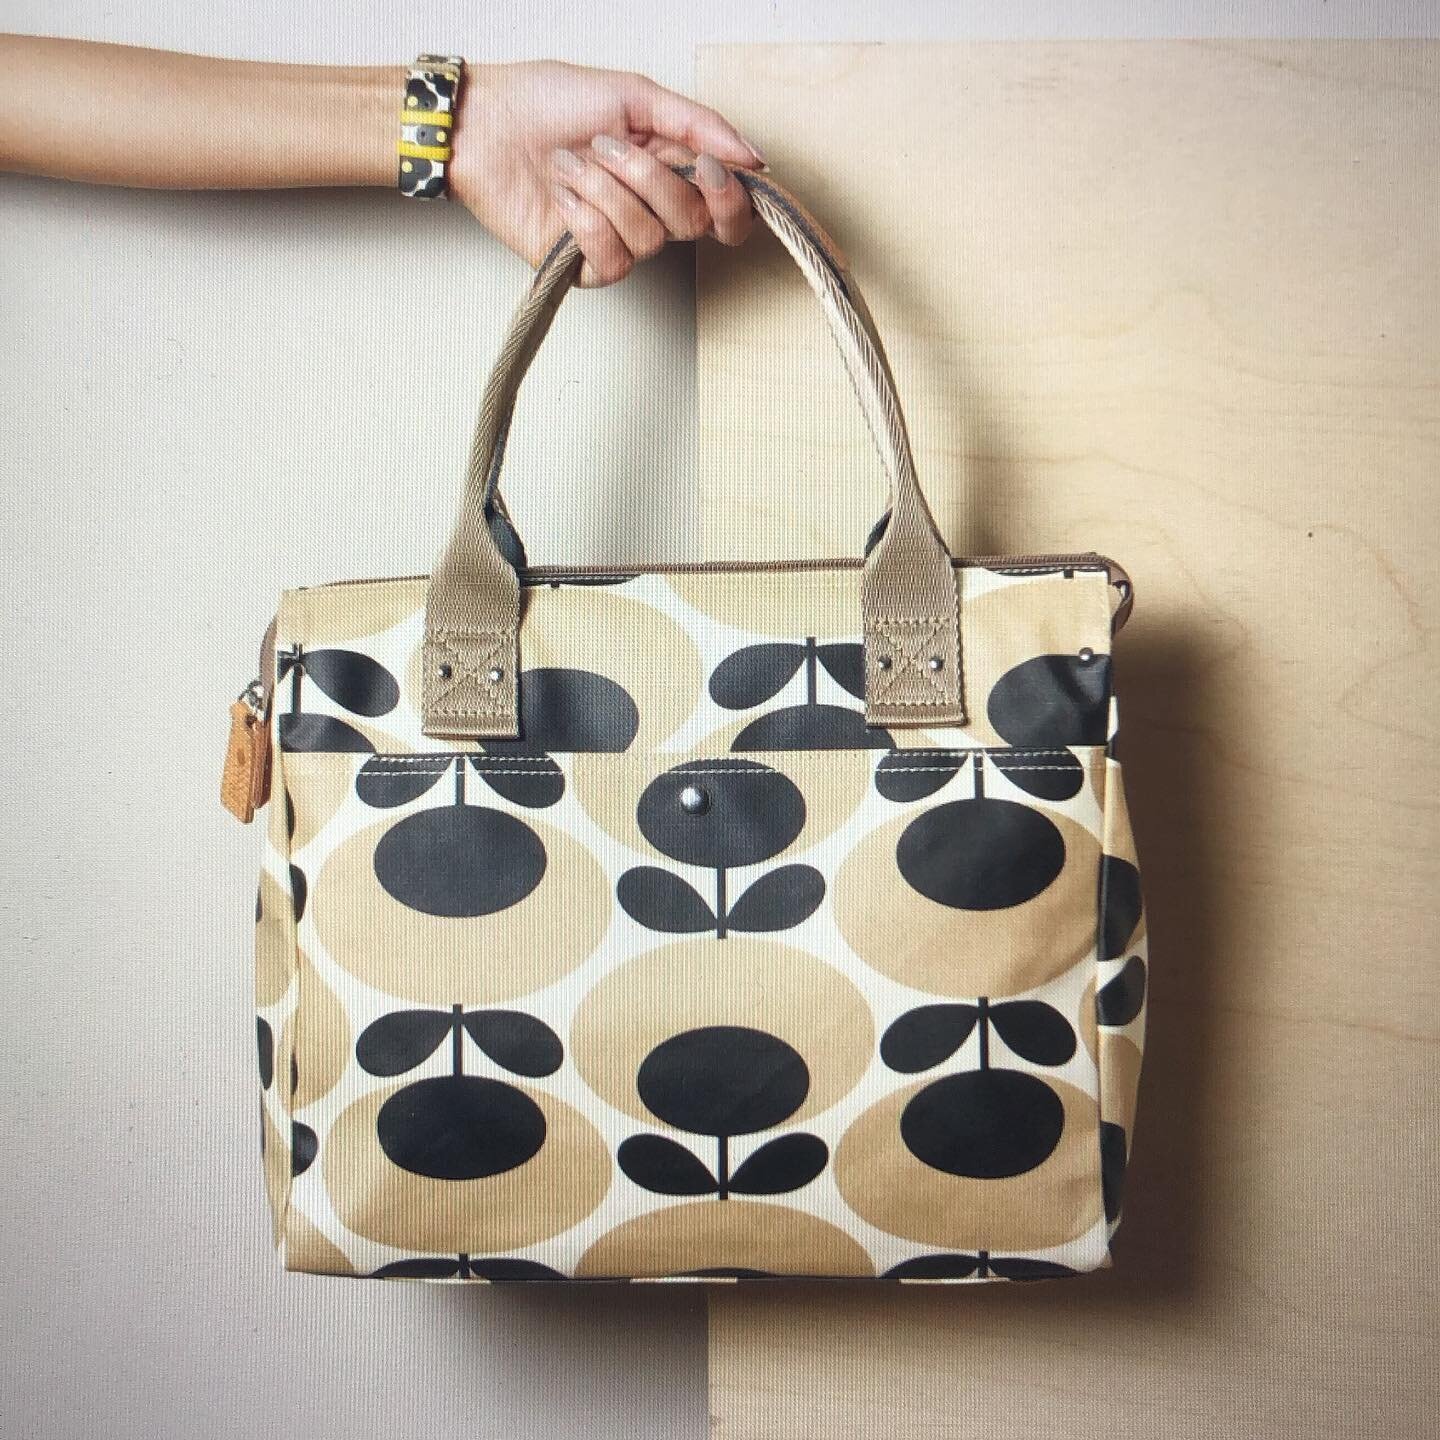 Archive story shot for @orlakiely brand. Simplicity and tone working well together. #orlakiely #artdirection #fashionstilllife #editorial #styling #handbags #orlakiely #orlakielybag